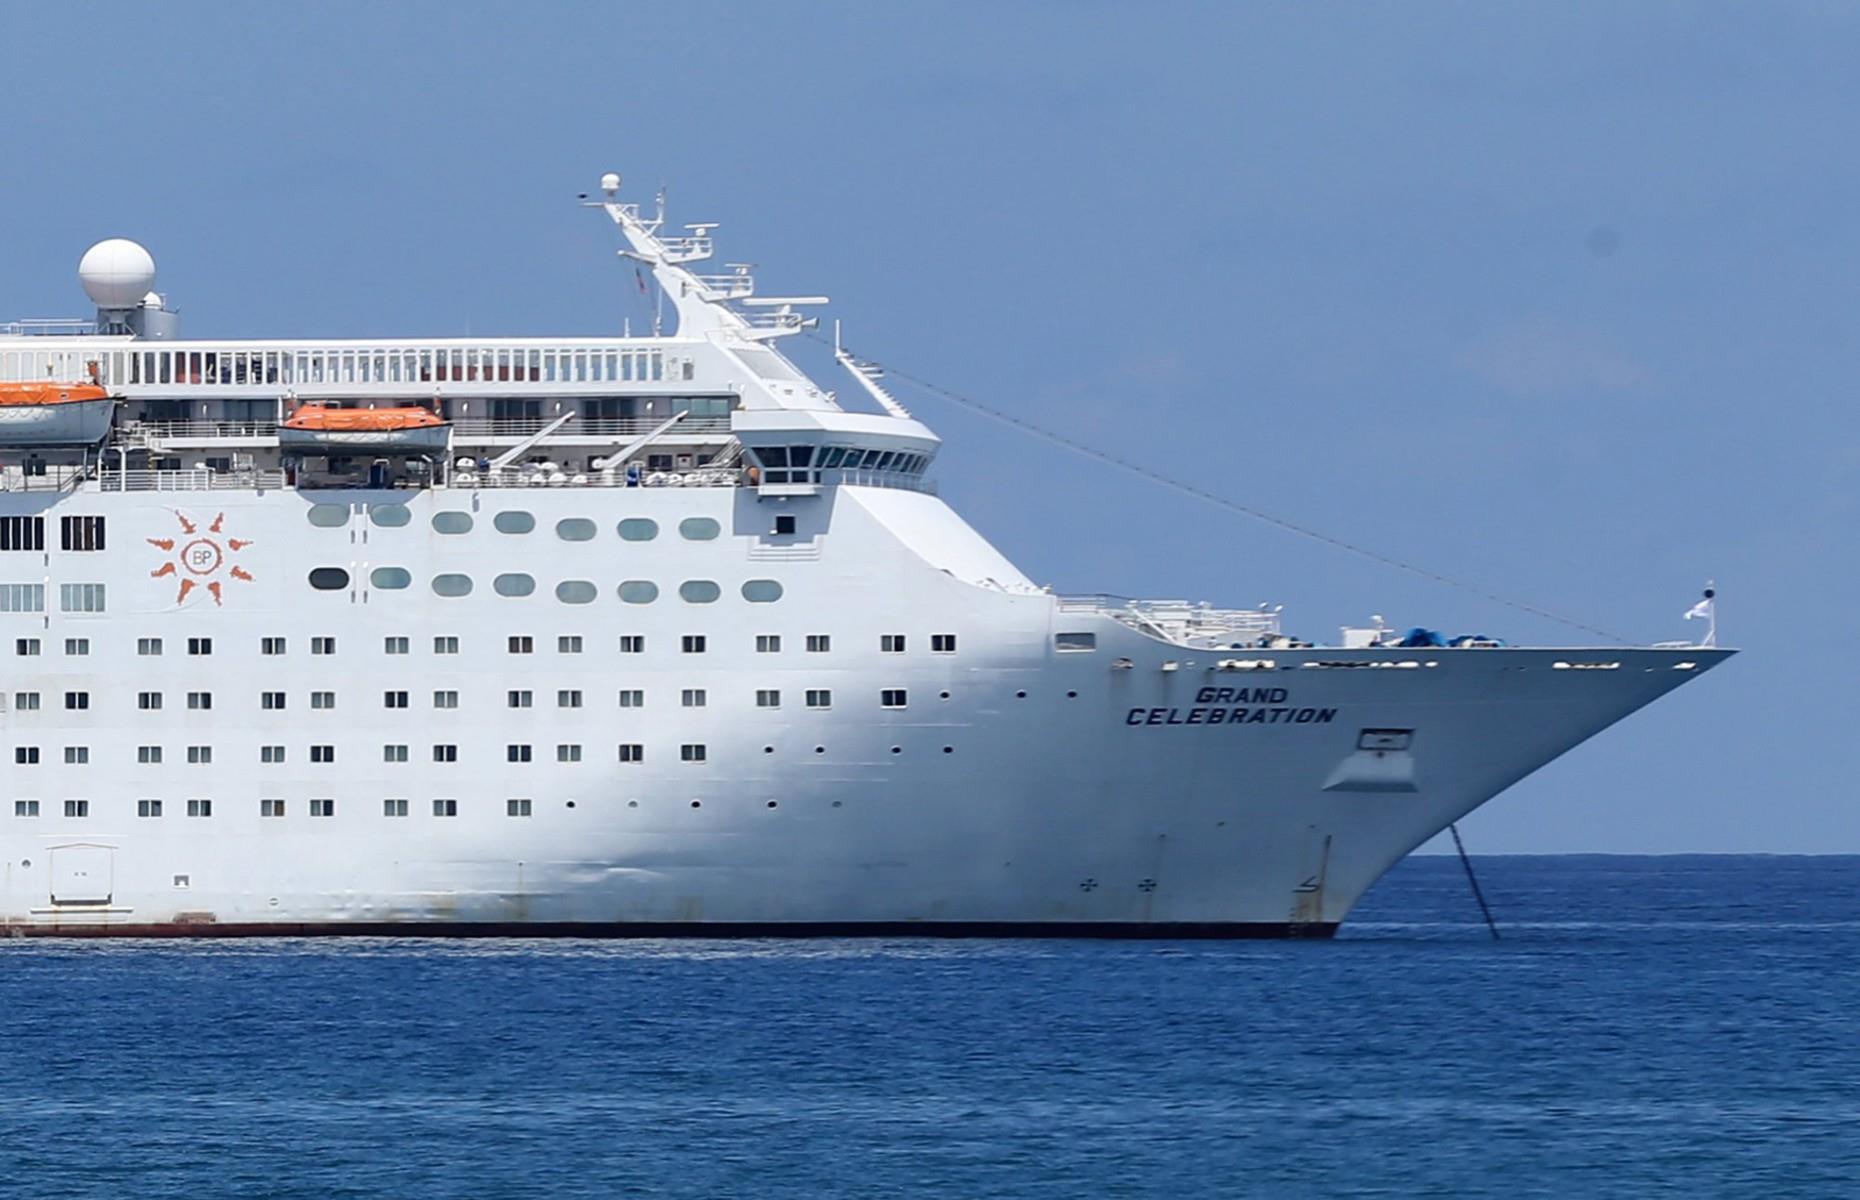 <p>The 1,500-passenger Grand Celebration was more than a cruise ship, she also helped the people of Grand Bahama Island during the devastating events caused by Hurricane Dorian in 2019. However, the ship was sold for scrap during the COVID-19 pandemic and headed for the Alang shipyard in India at the end of 2020.  </p>  <p><strong><a href="https://www.lovemoney.com/galleries/104789/stories-of-hope-places-that-bounced-back-from-the-worlds-worst-weather?page=1">Stories of hope: amazing places that bounced back from the world's worst weather</a></strong></p>